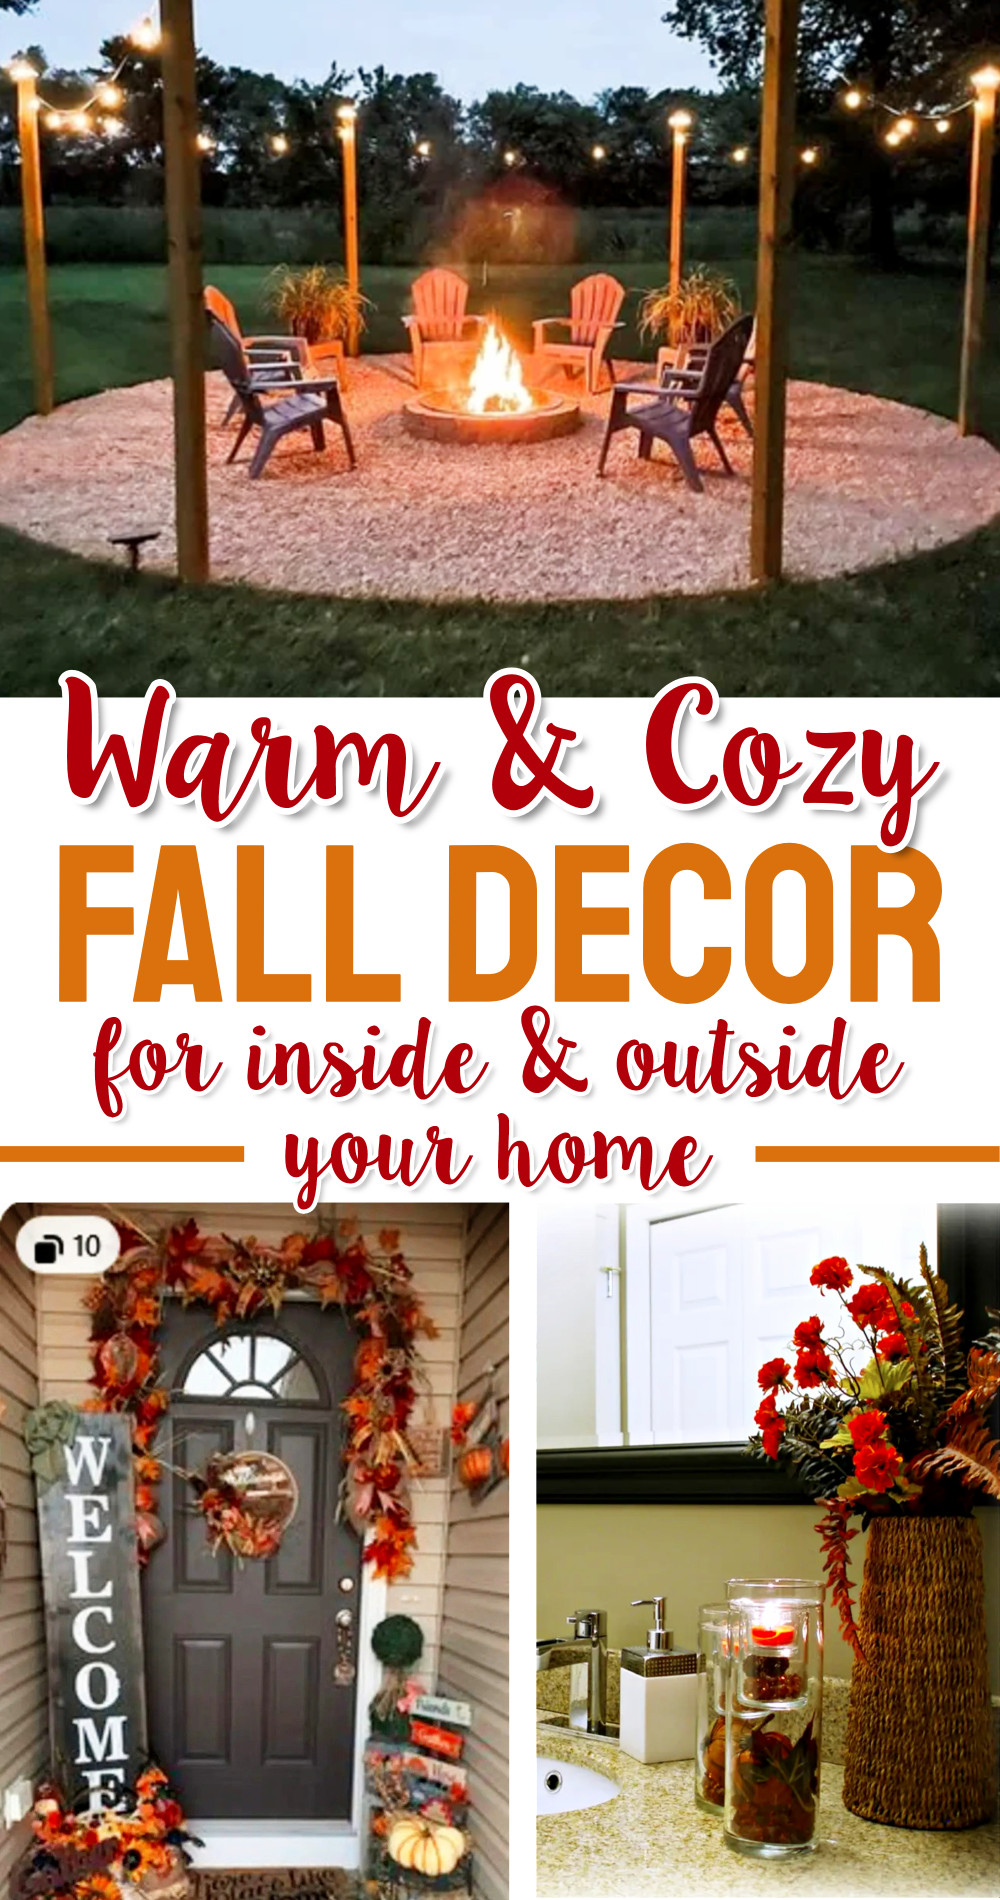 Warm and Cozy Fall Decor For Inside and Outside Your Home